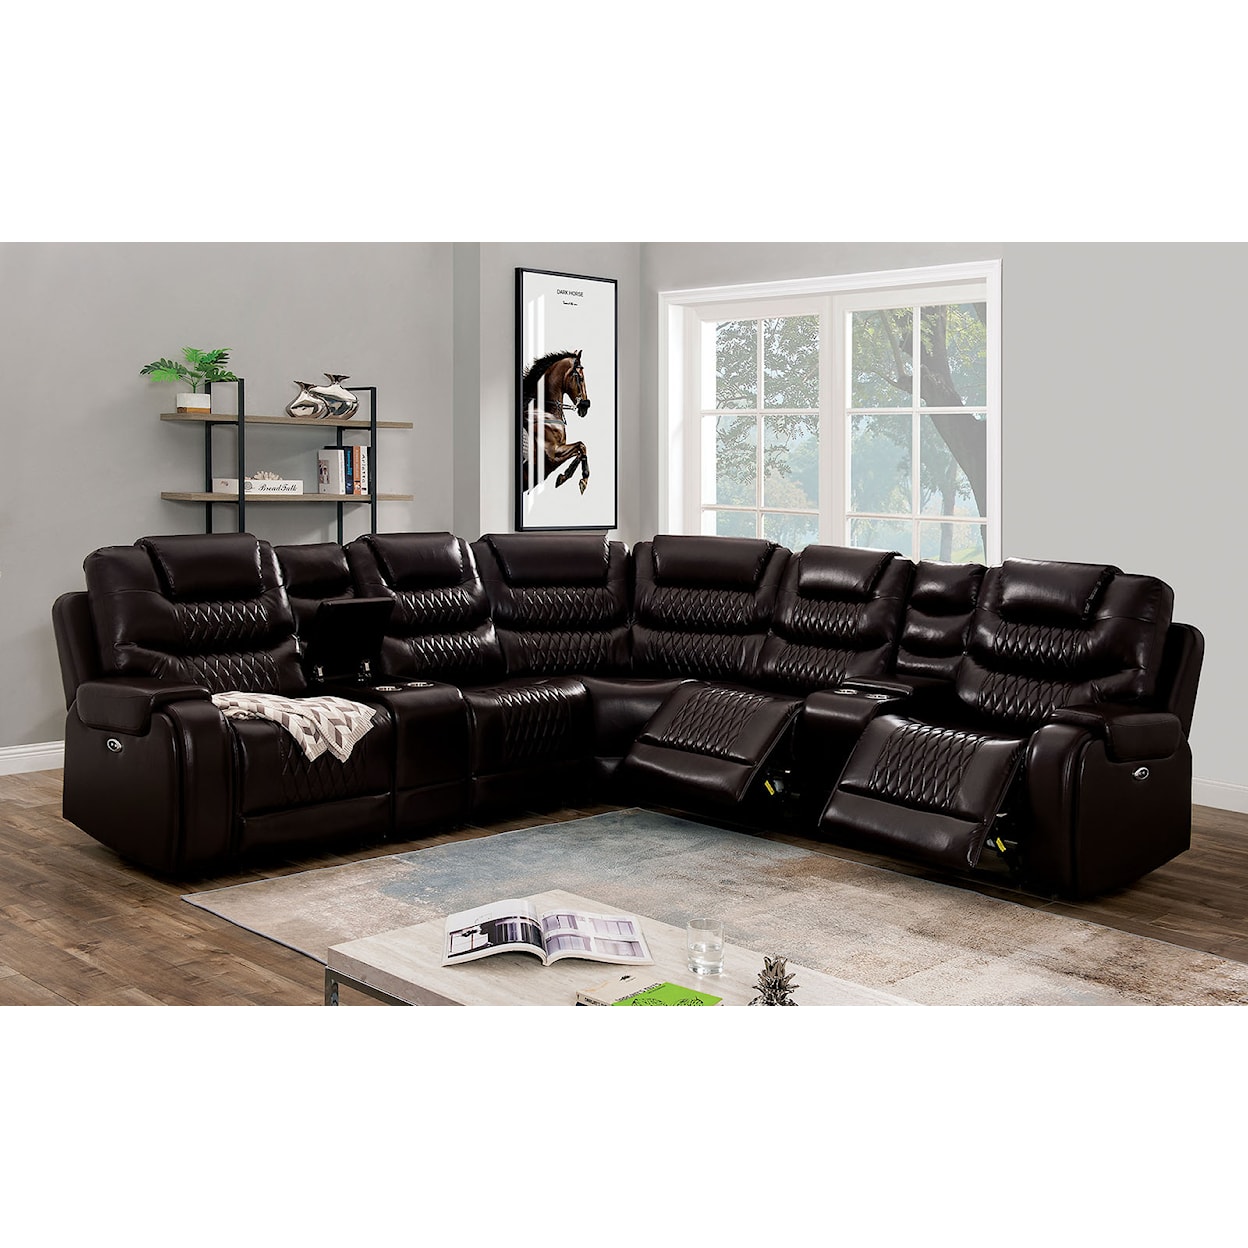 Furniture of America Mariah Upholstery Power Sectional